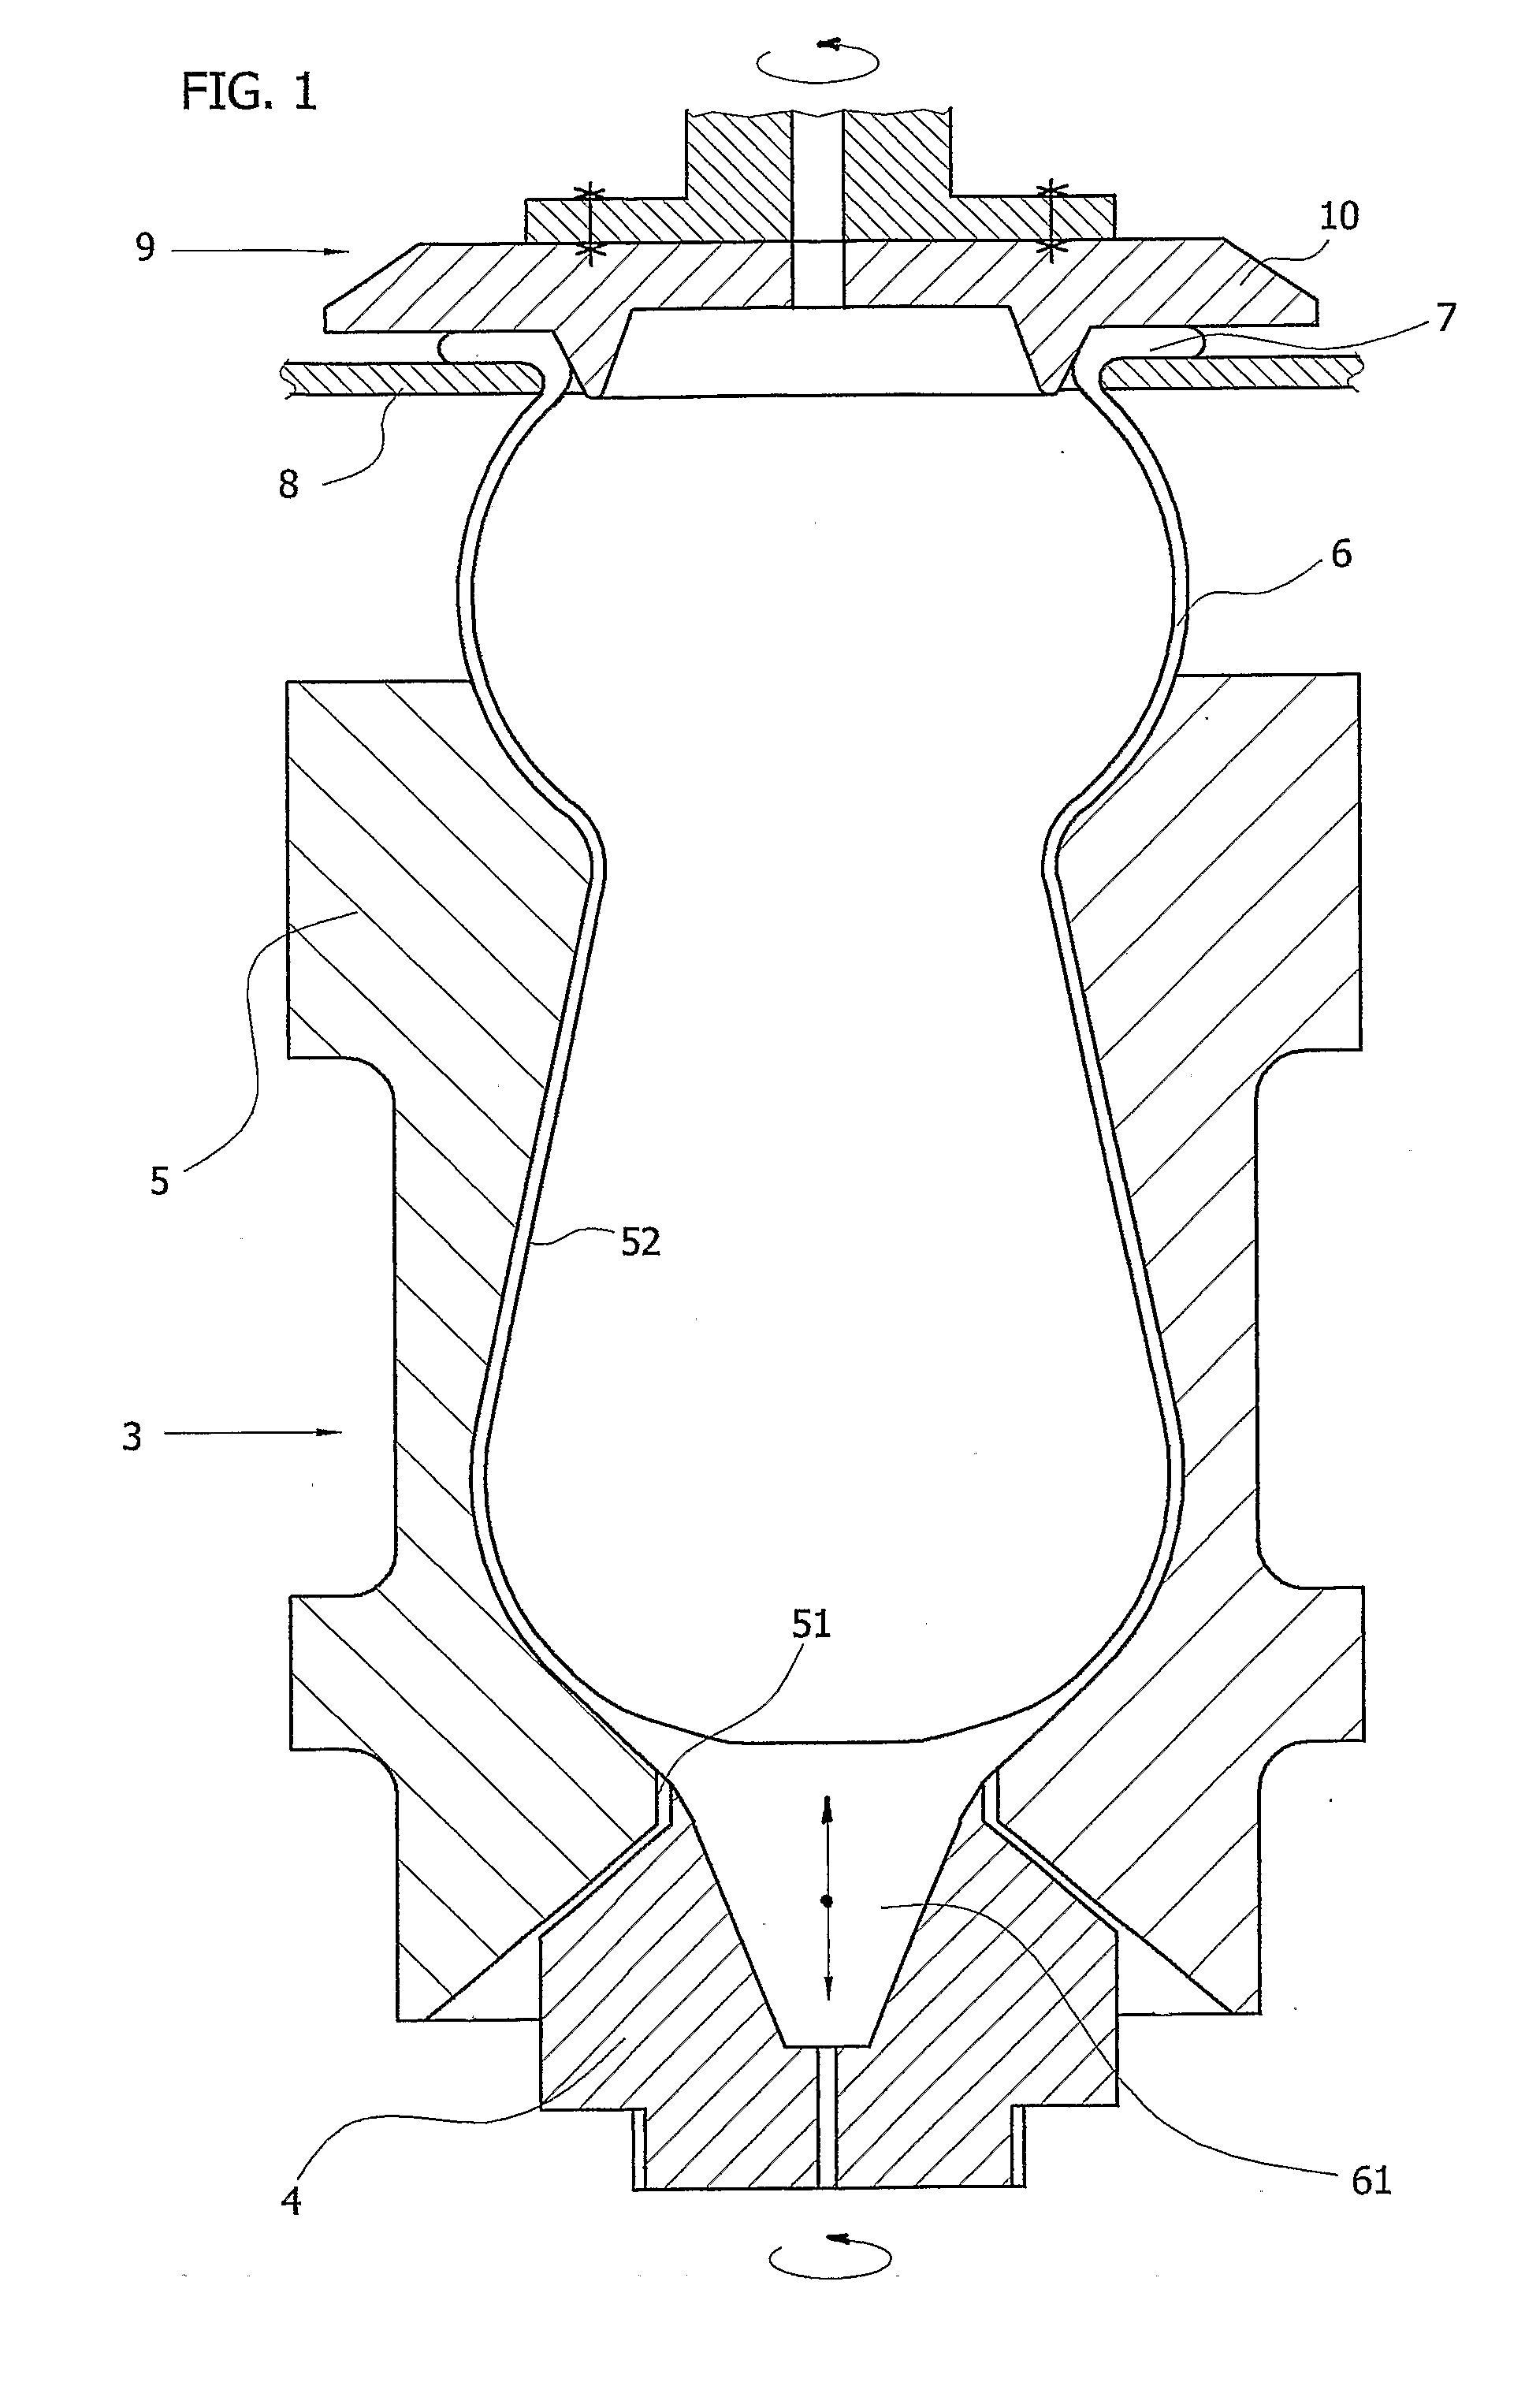 Method of Manufacture of Glass Flasks with Stem and Apparatus for Performing of this Method